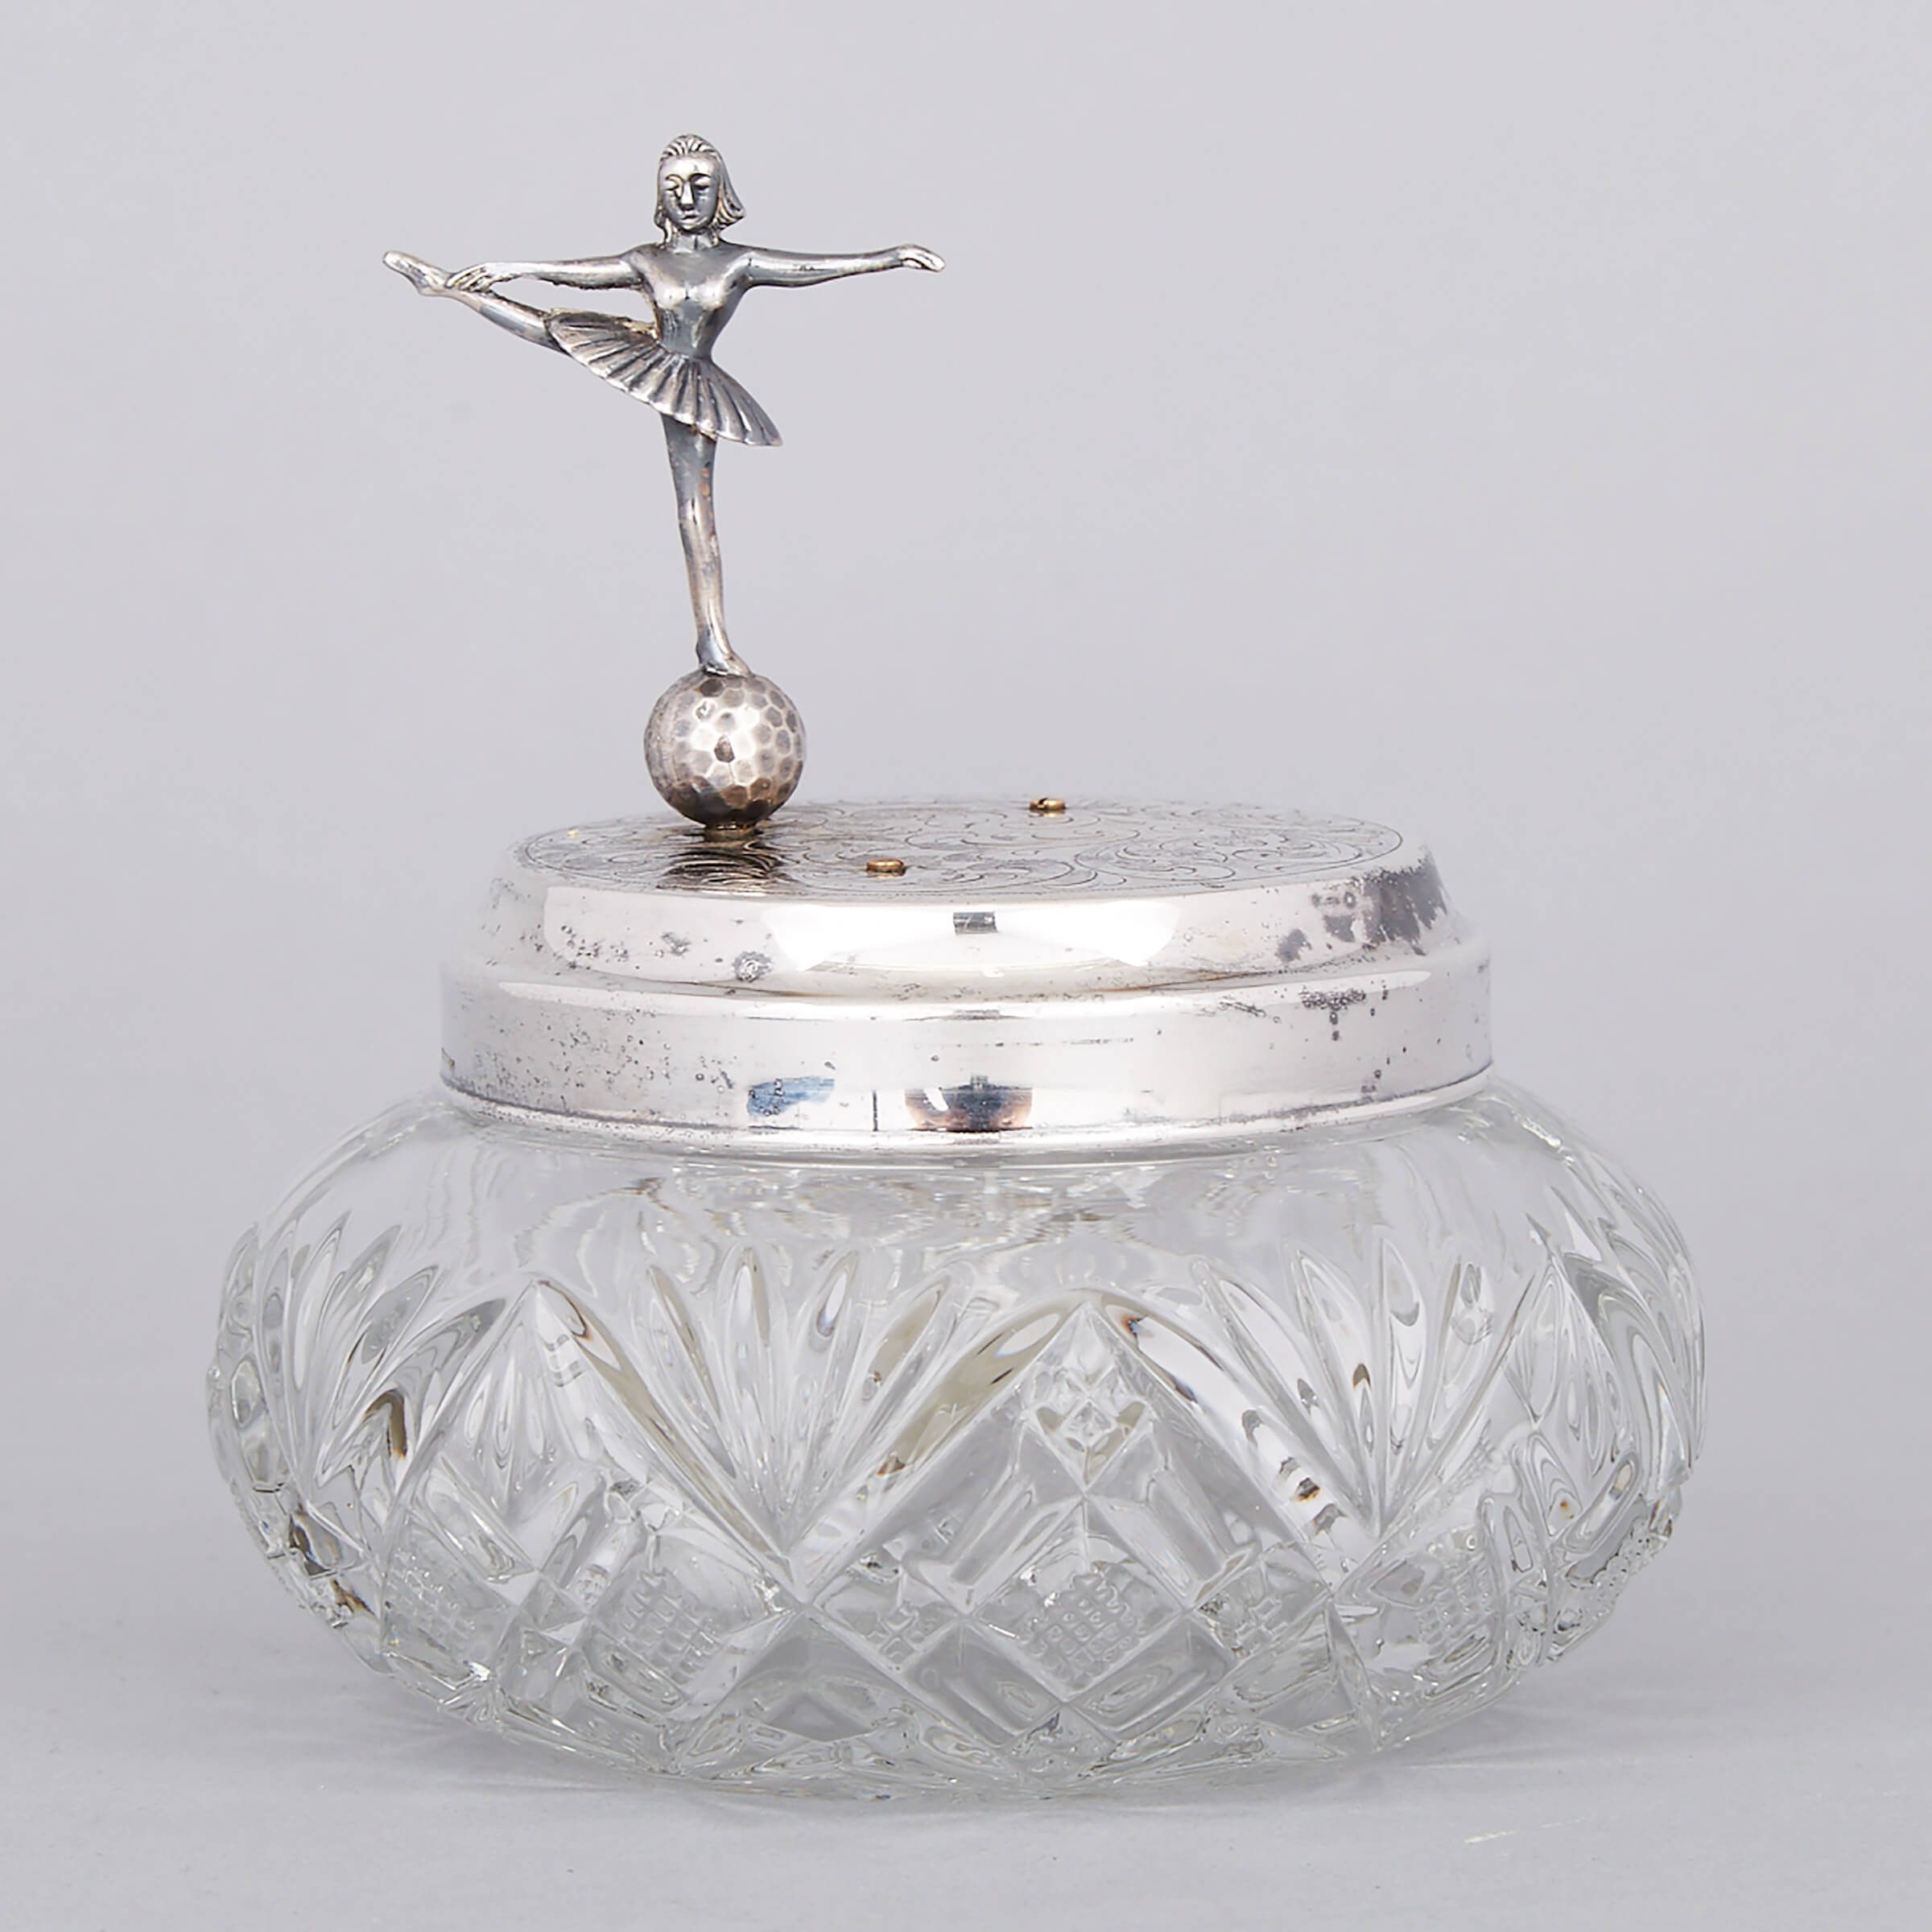 German Silver Plate and Cut Glass Musical Dressing Table Jar, mid-20th century